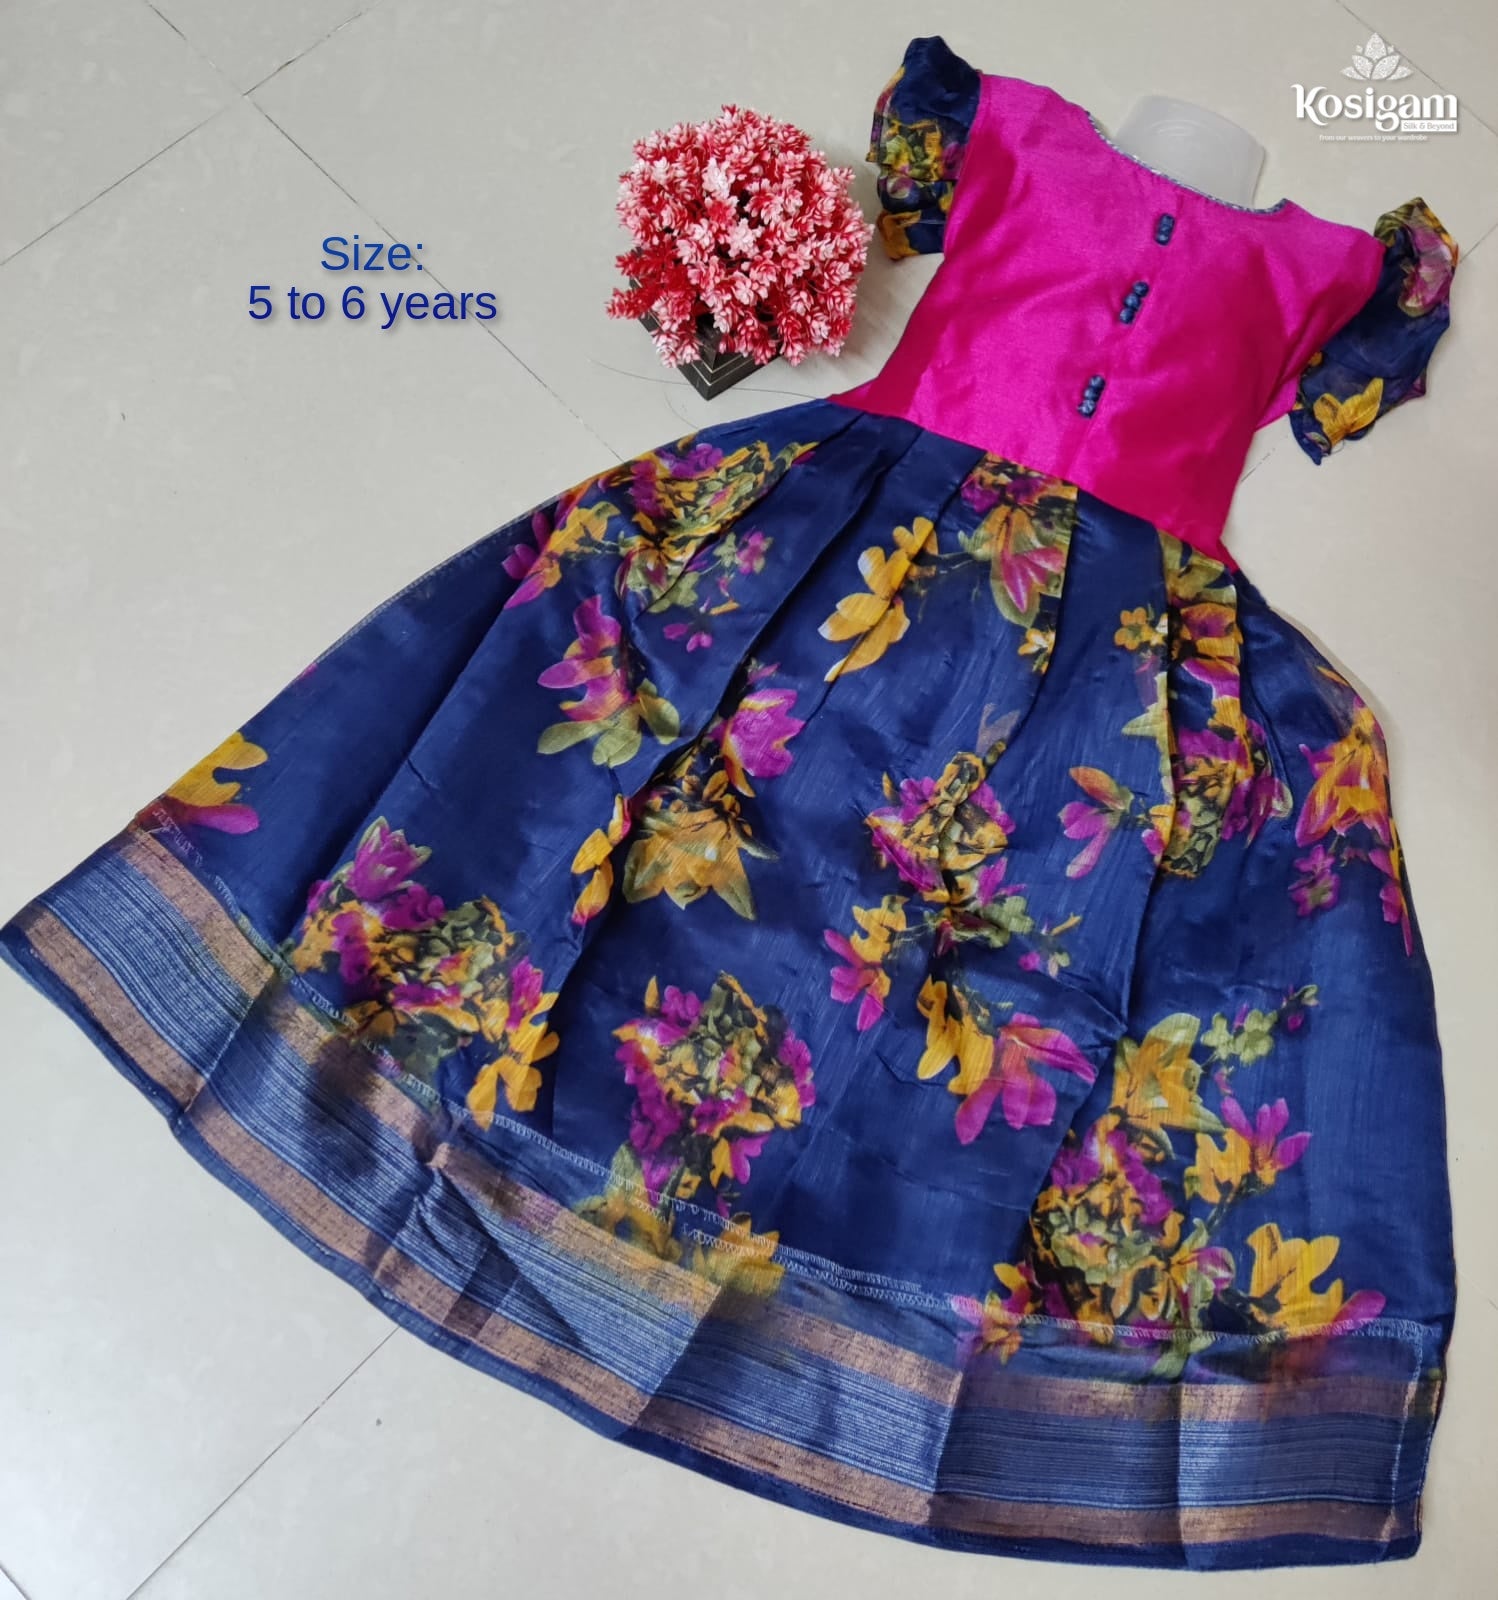 BabySpace Shop - Handmade Cotton Printed Baby Dress - 5 to 6 years starting  at Rs 1,300.00 LKR A special handmade printed cotton dress for toddler.  Zips at the back. Soft fabric.